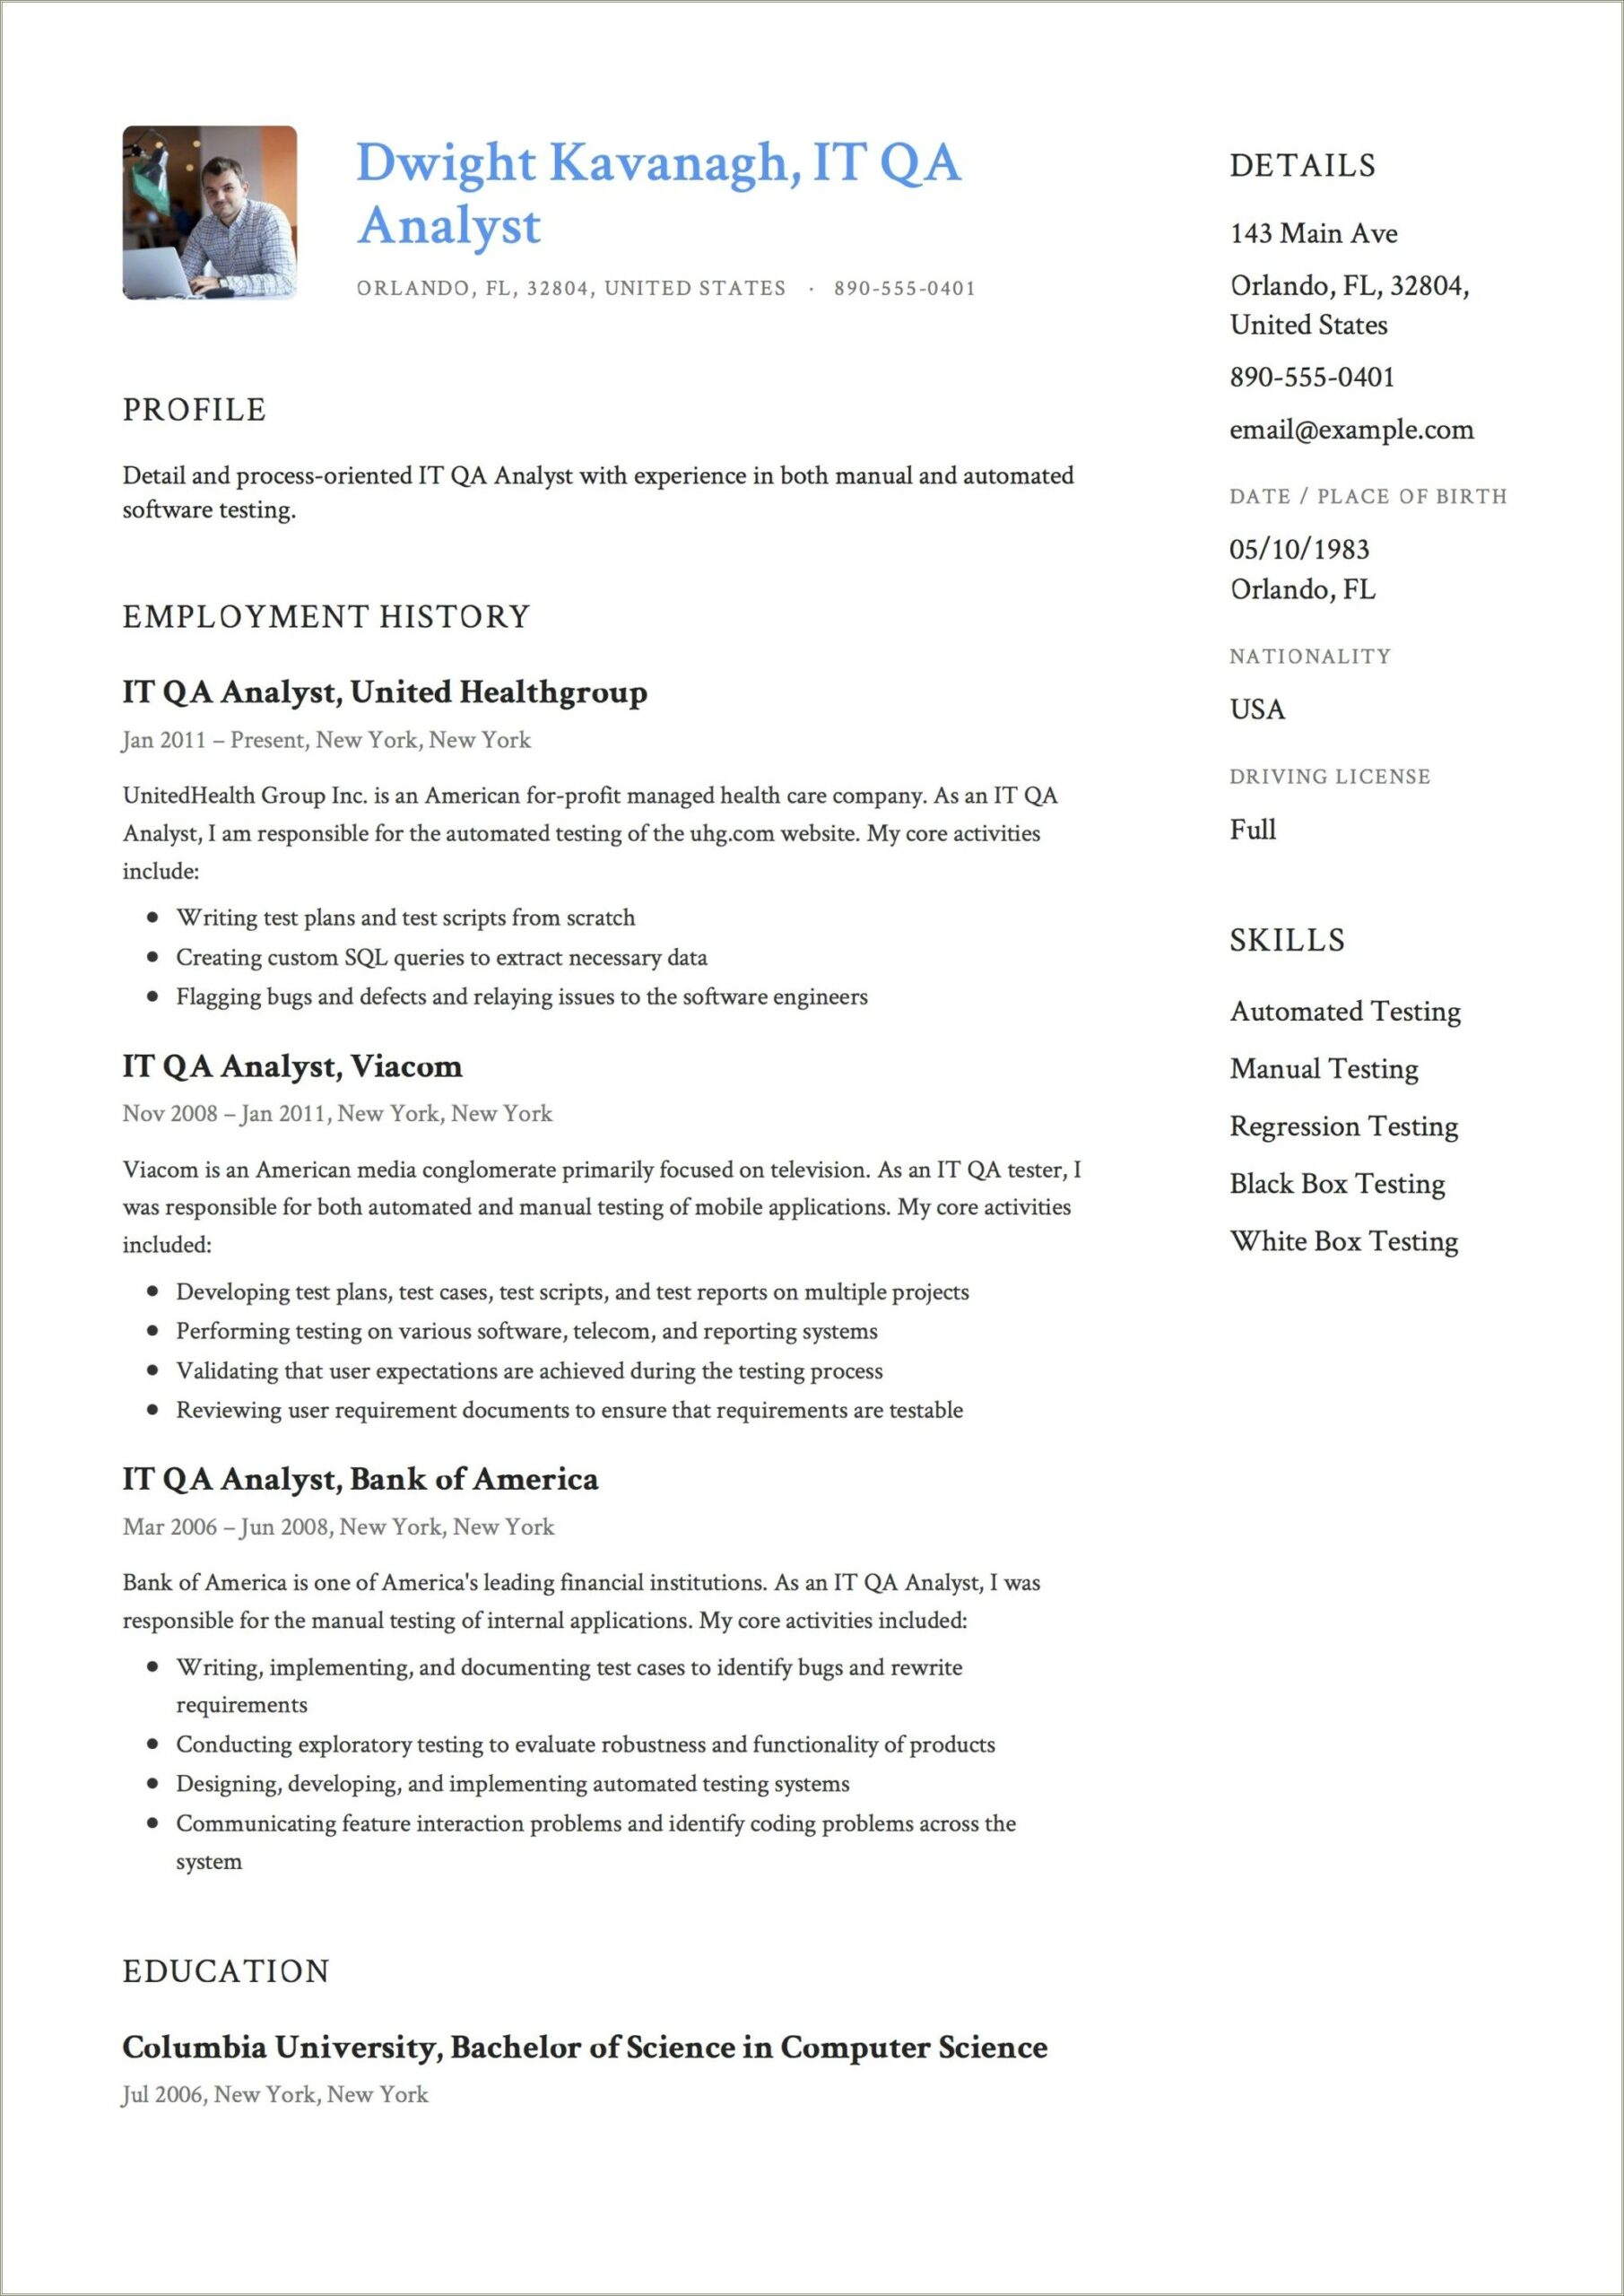 Experience Resume Format One Year Experience In Testing